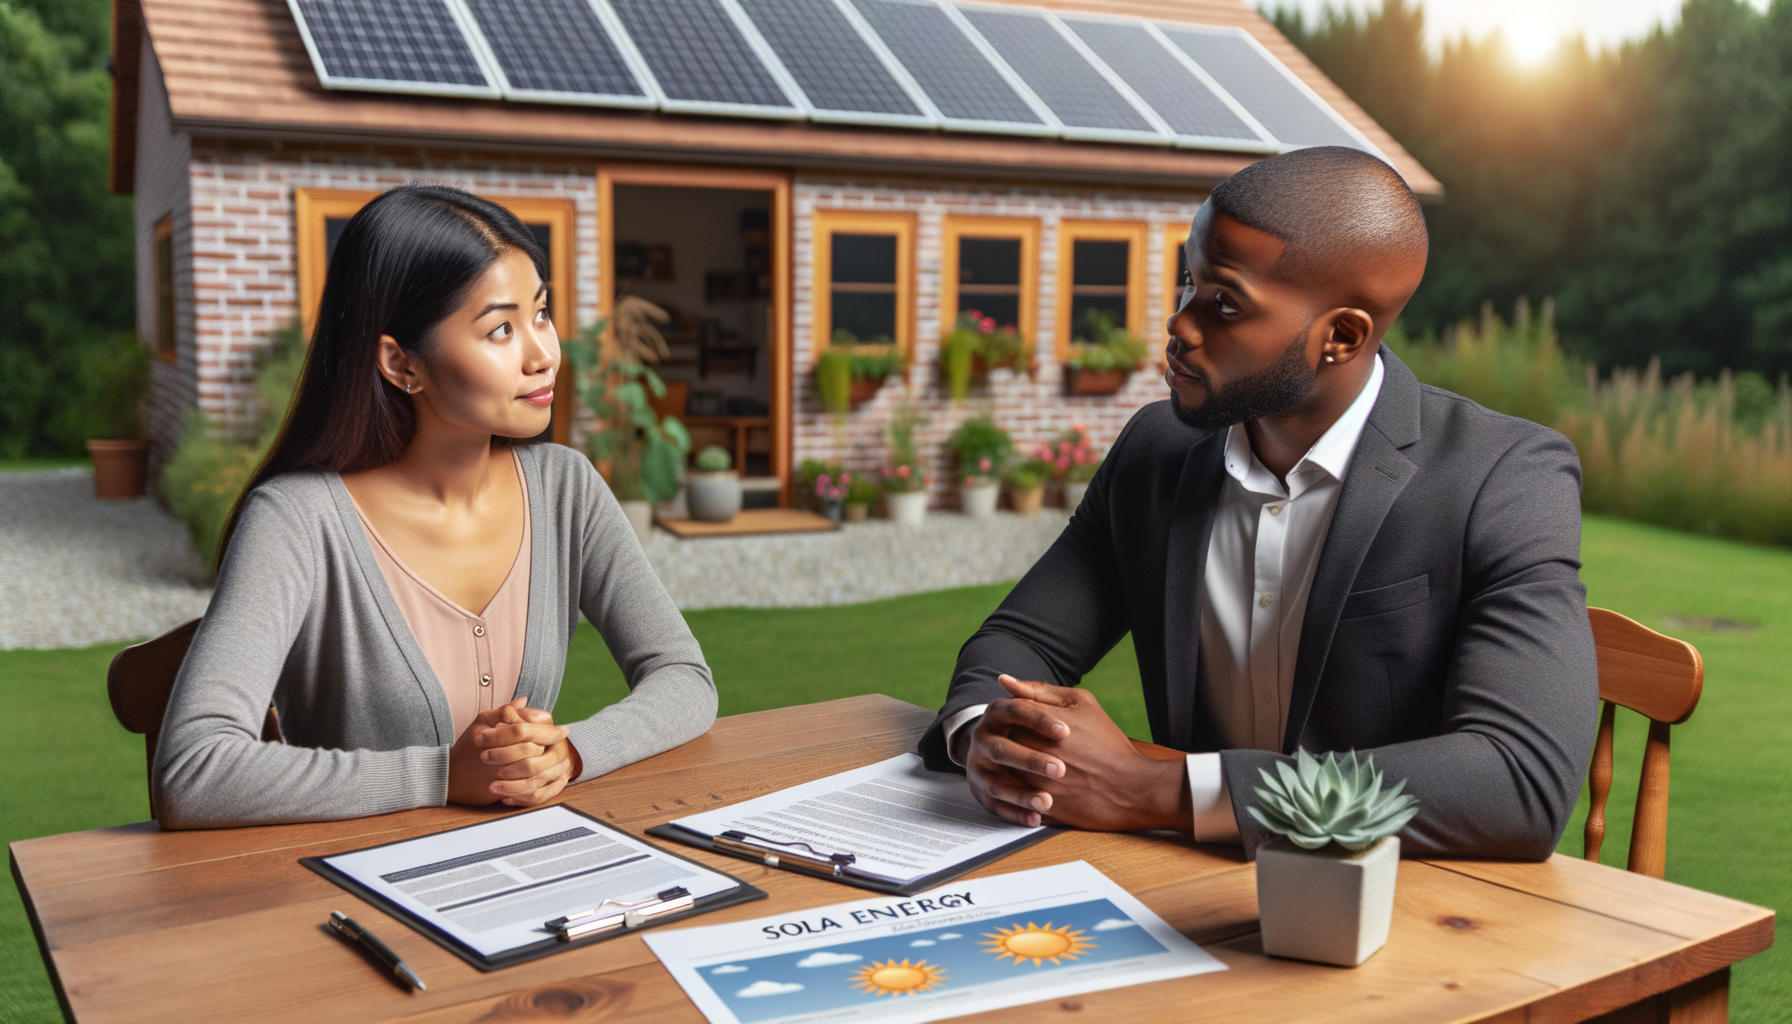 ALT: Homeowner consulting with solar expert